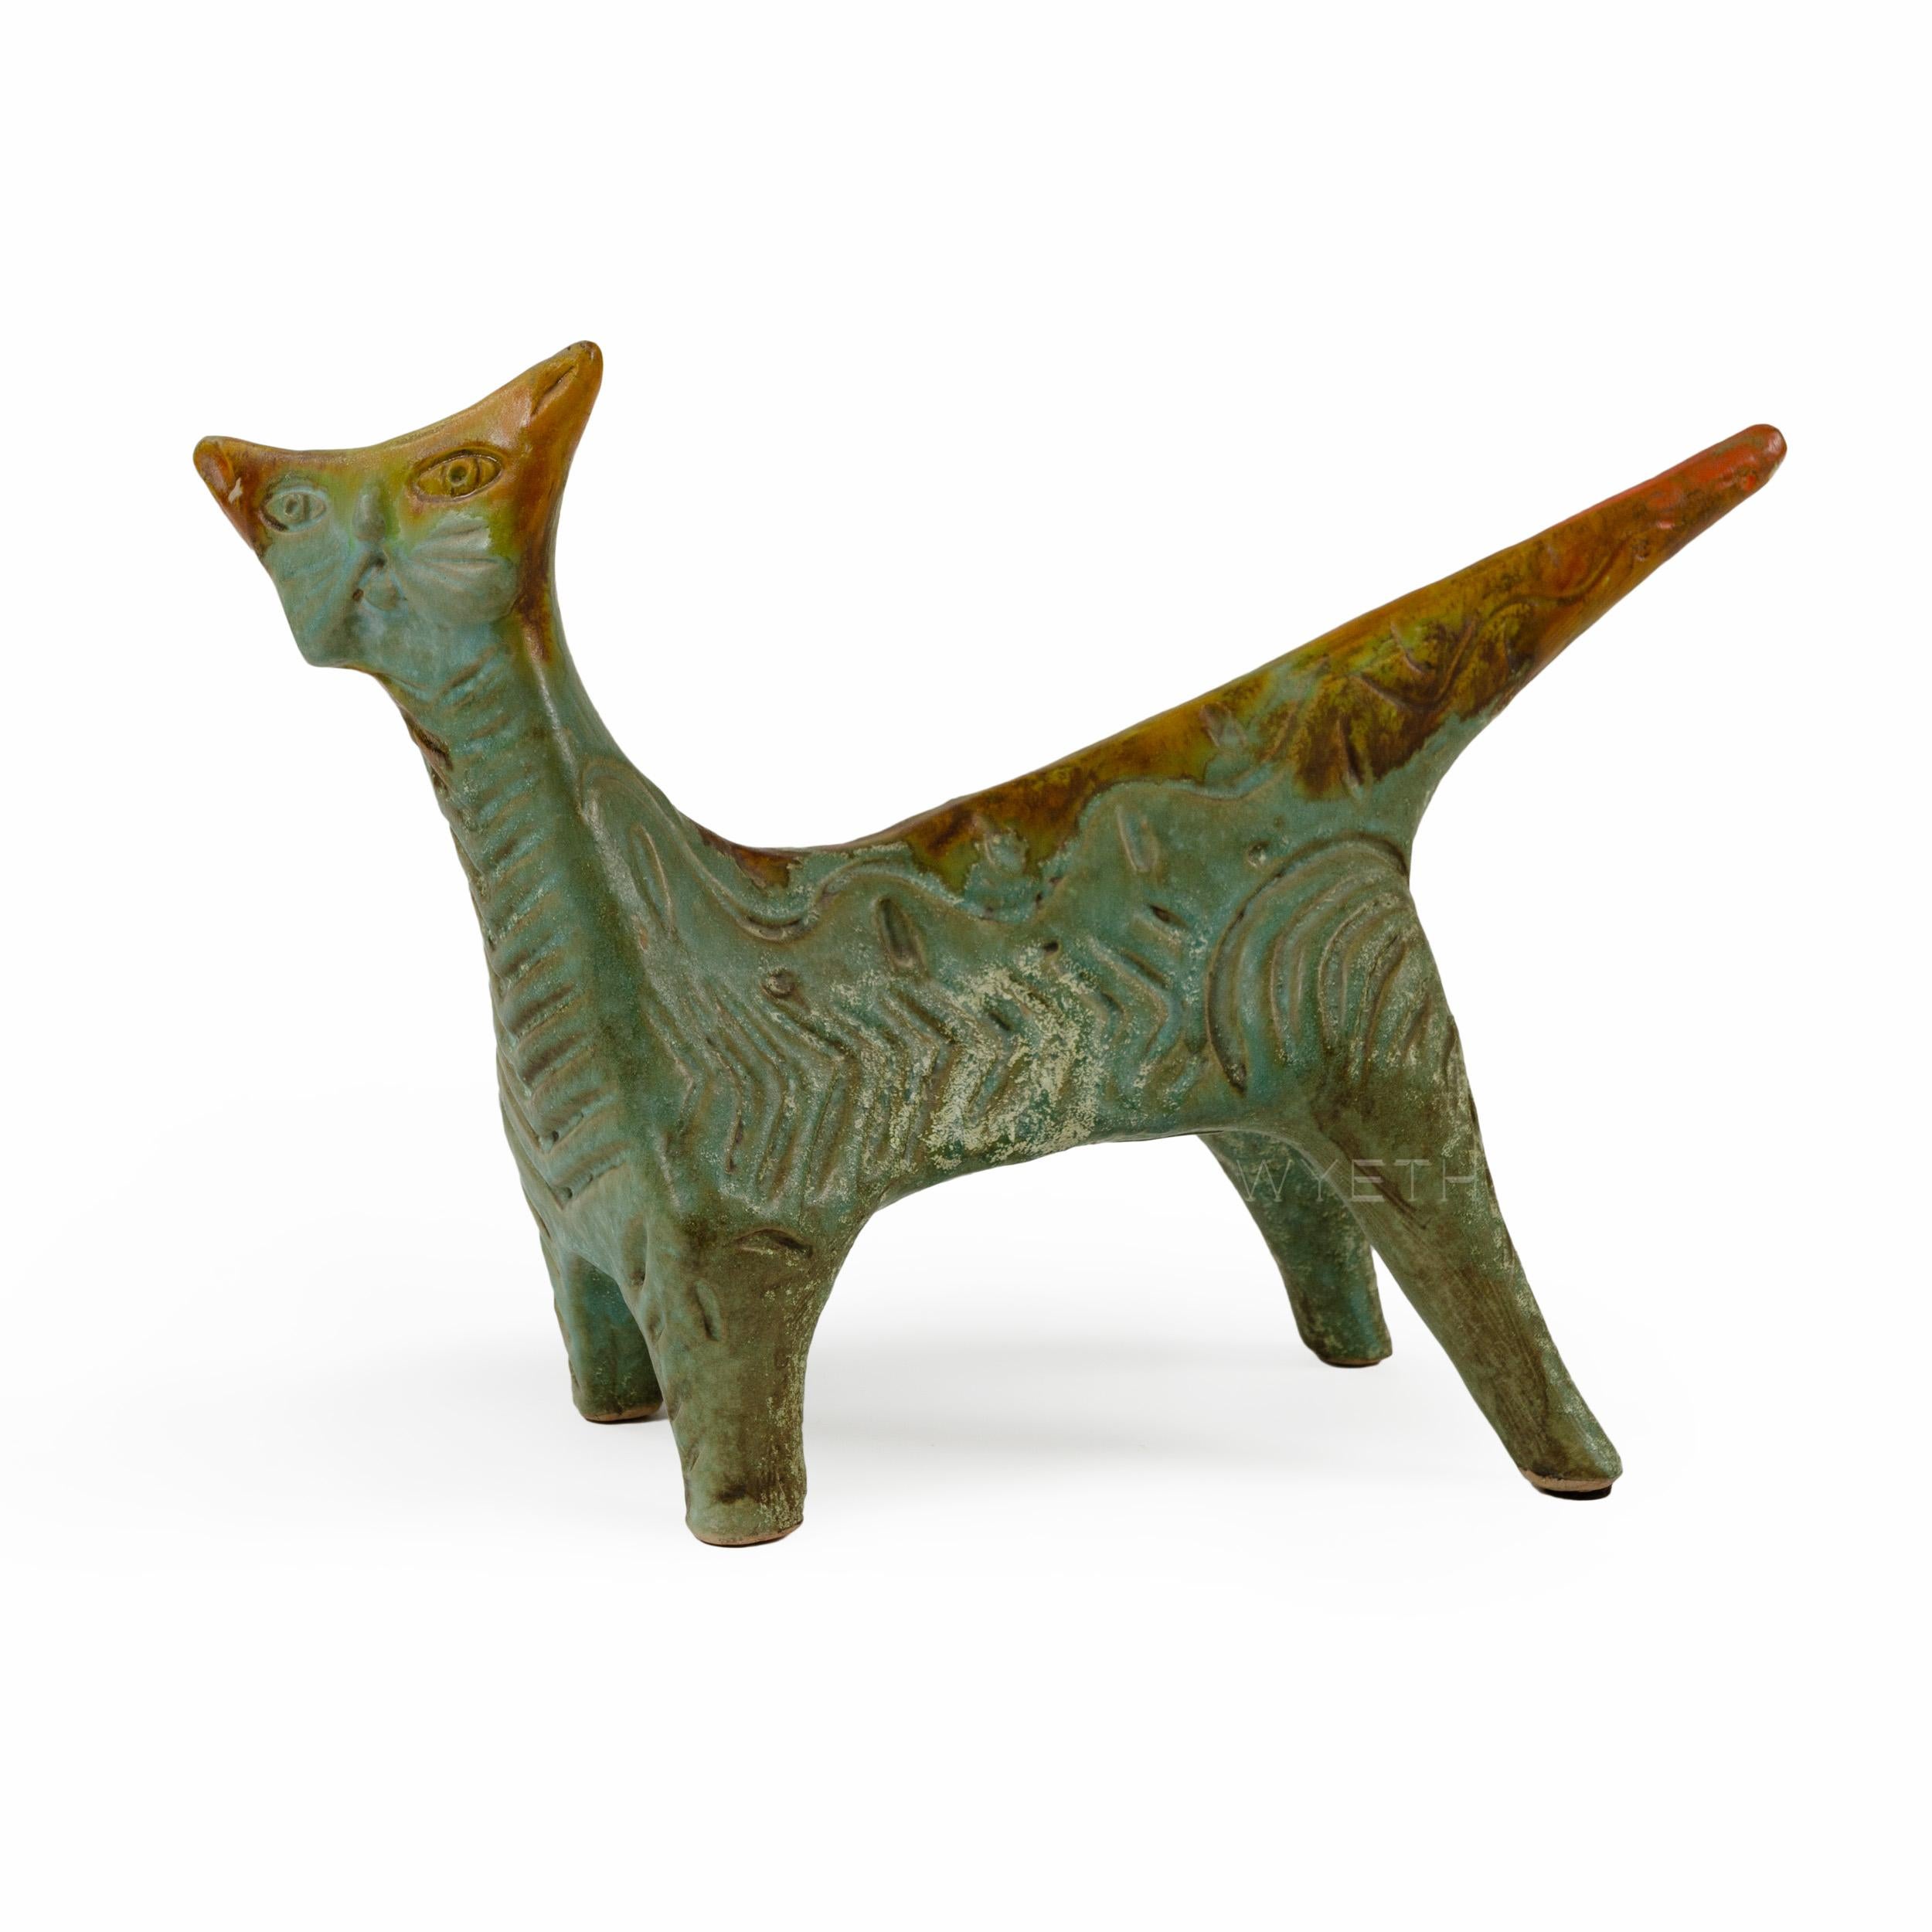 A ceramic cat with an orange and green glaze inscribed with a graphic design.